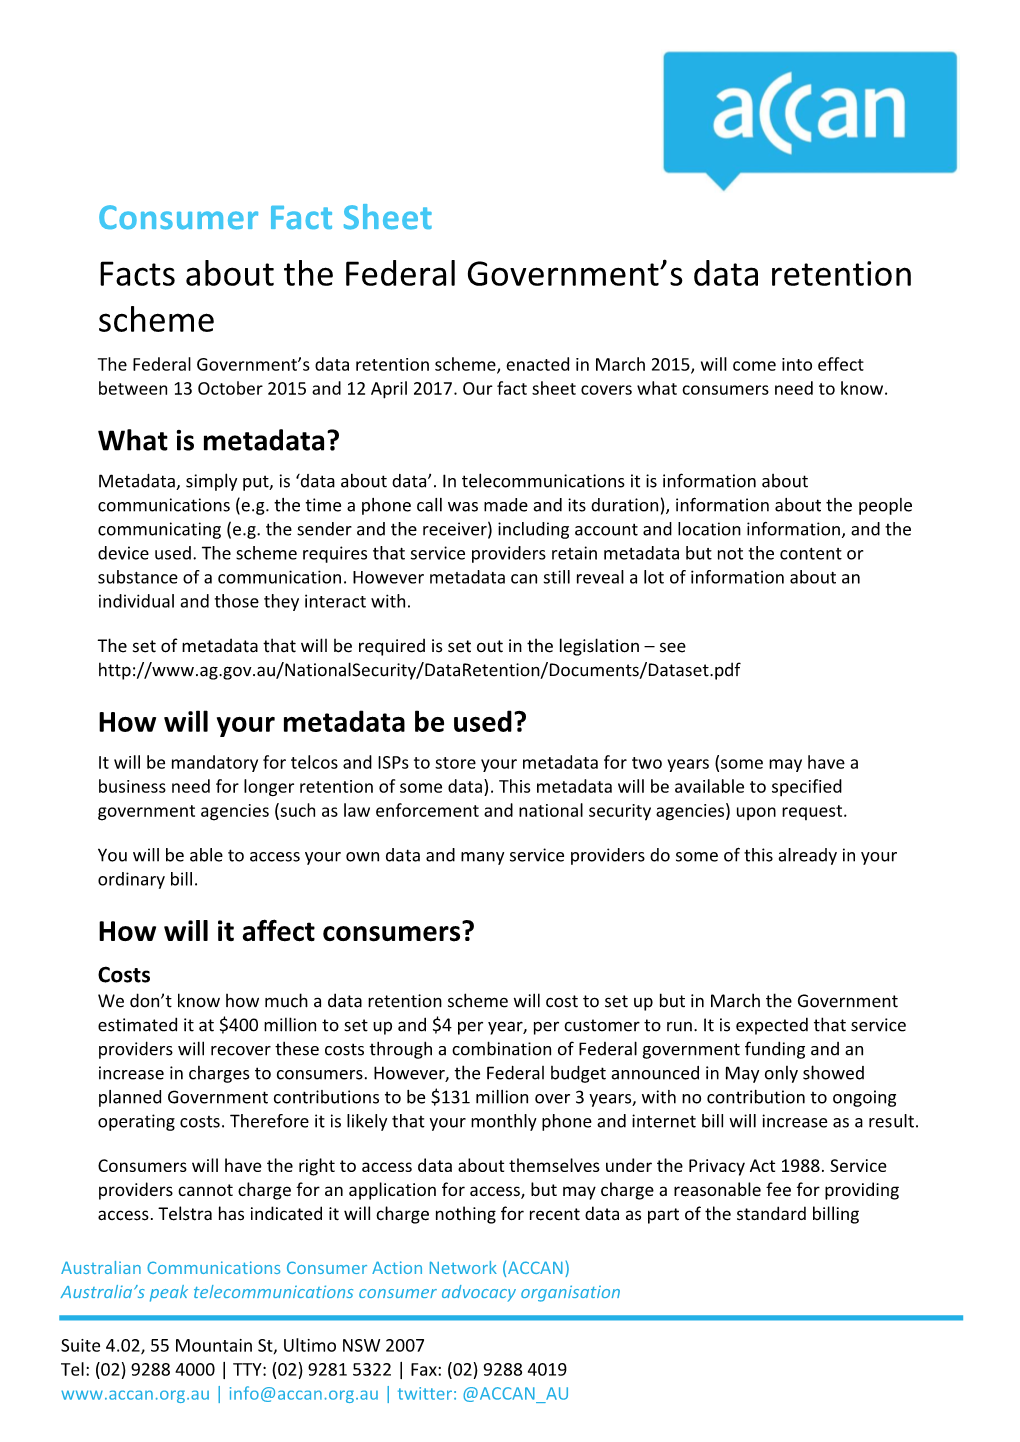 Facts About the Federal Government's Data Retention Scheme